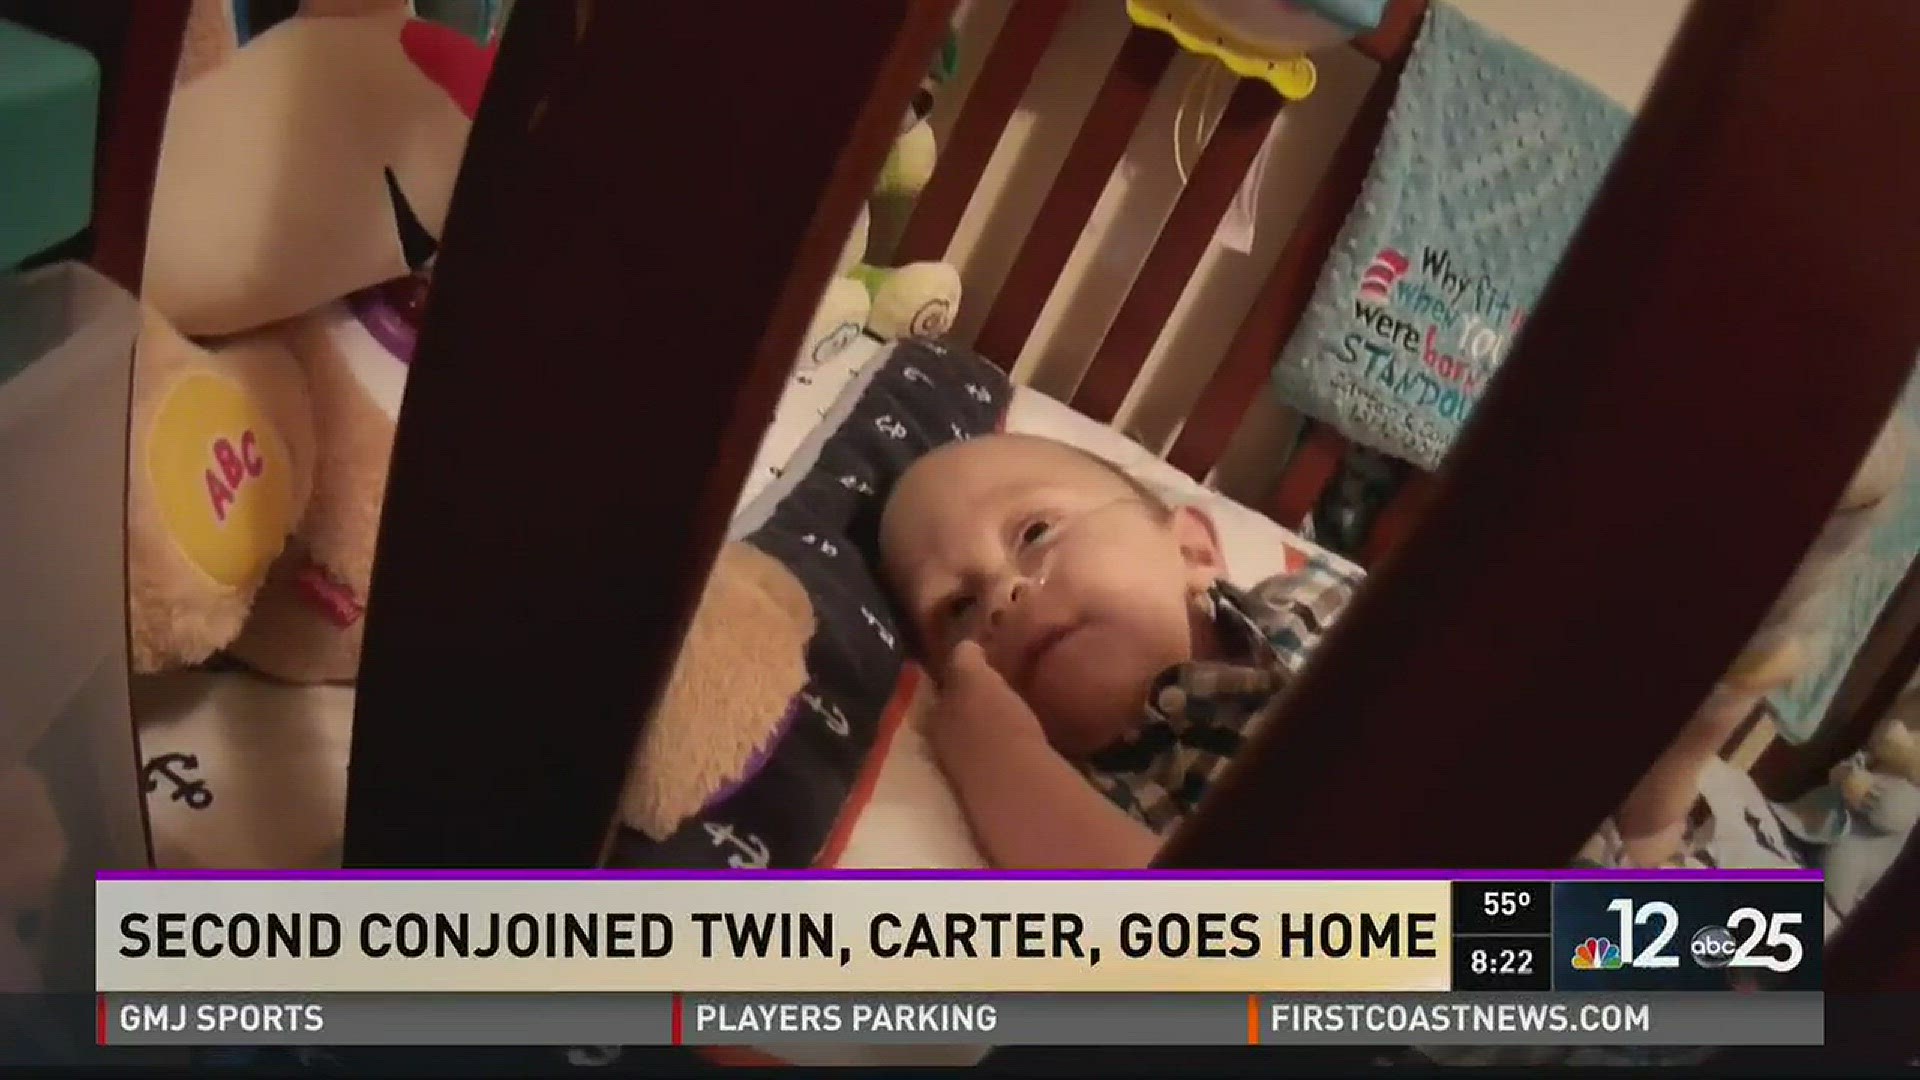 Second conjoined twin, Carter, goes home